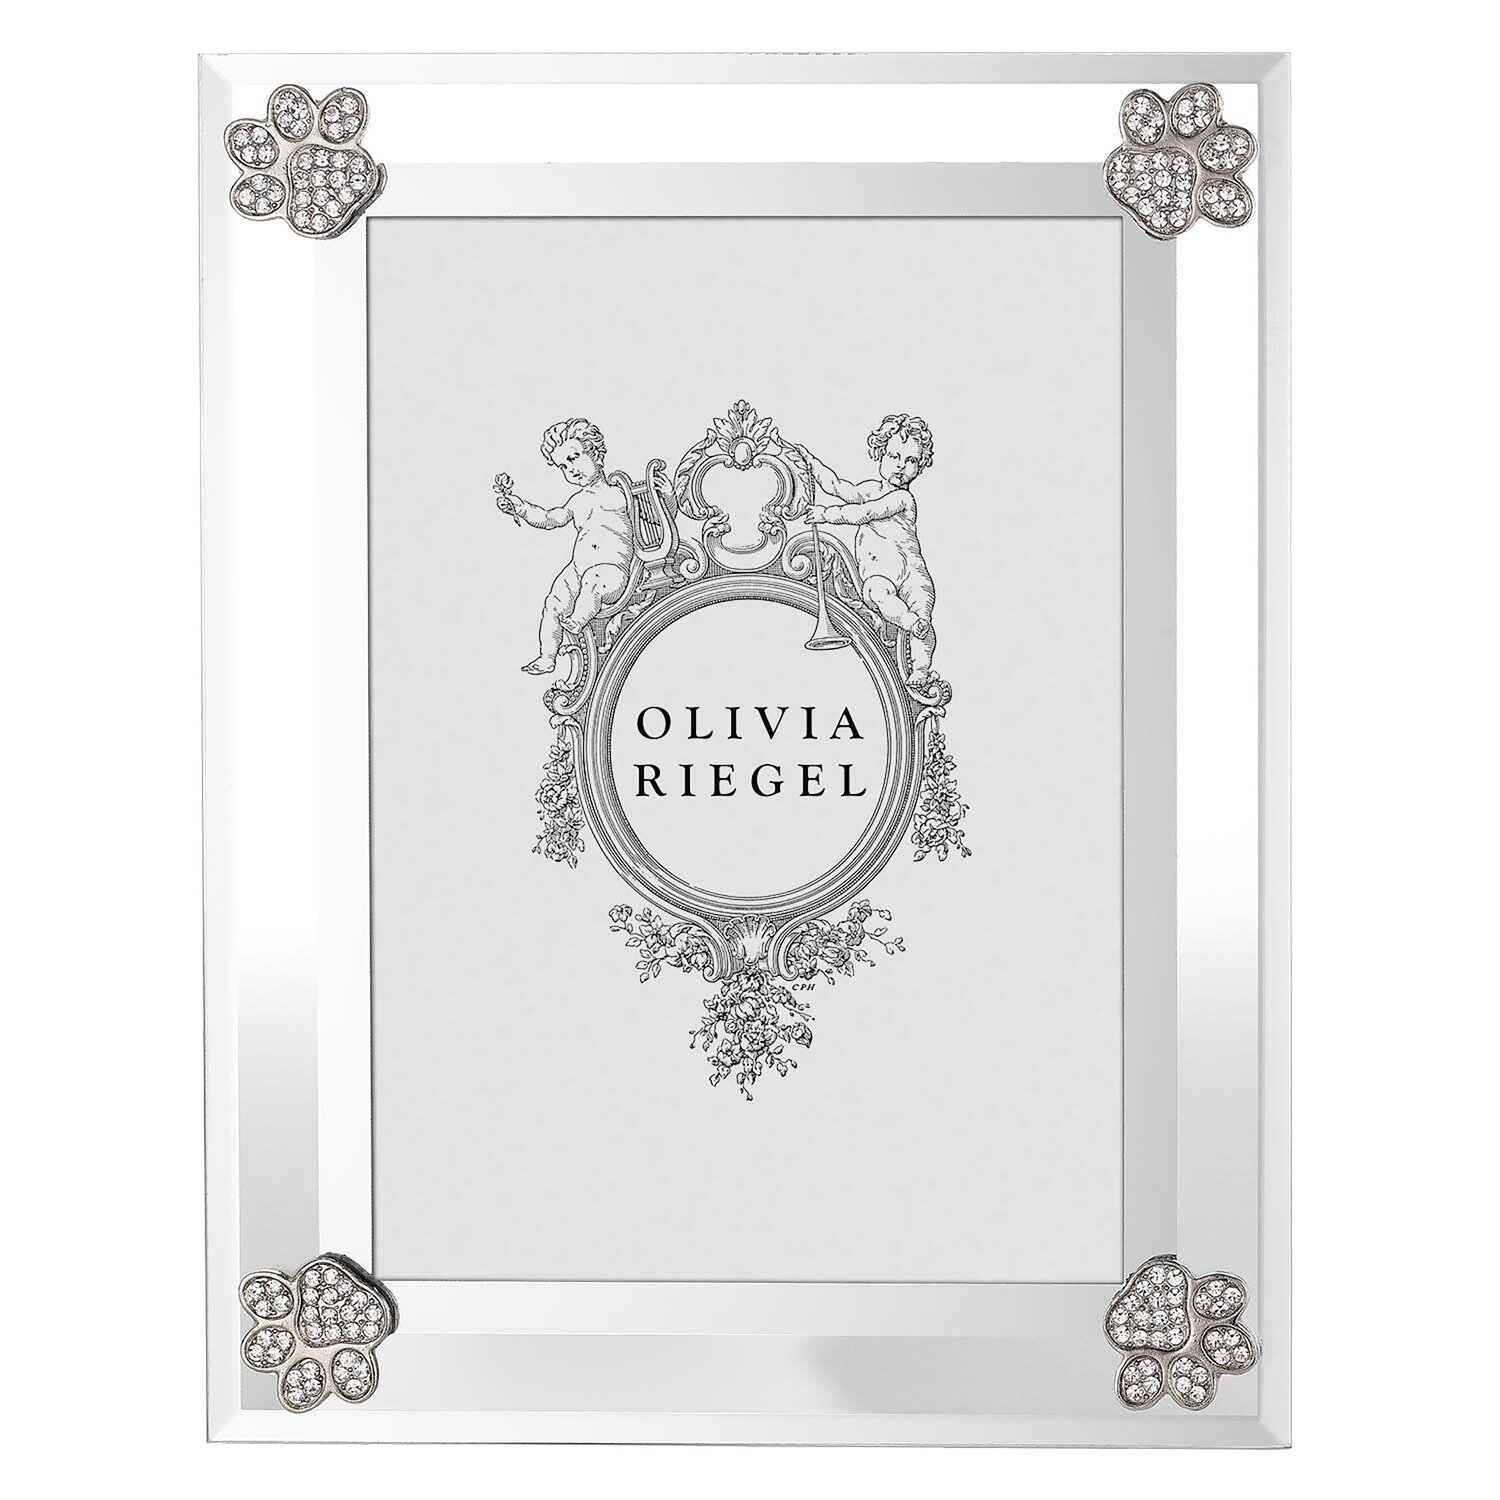 Olivia Riegel Paw Print 5 x 7 Inch Picture Frame RT4801